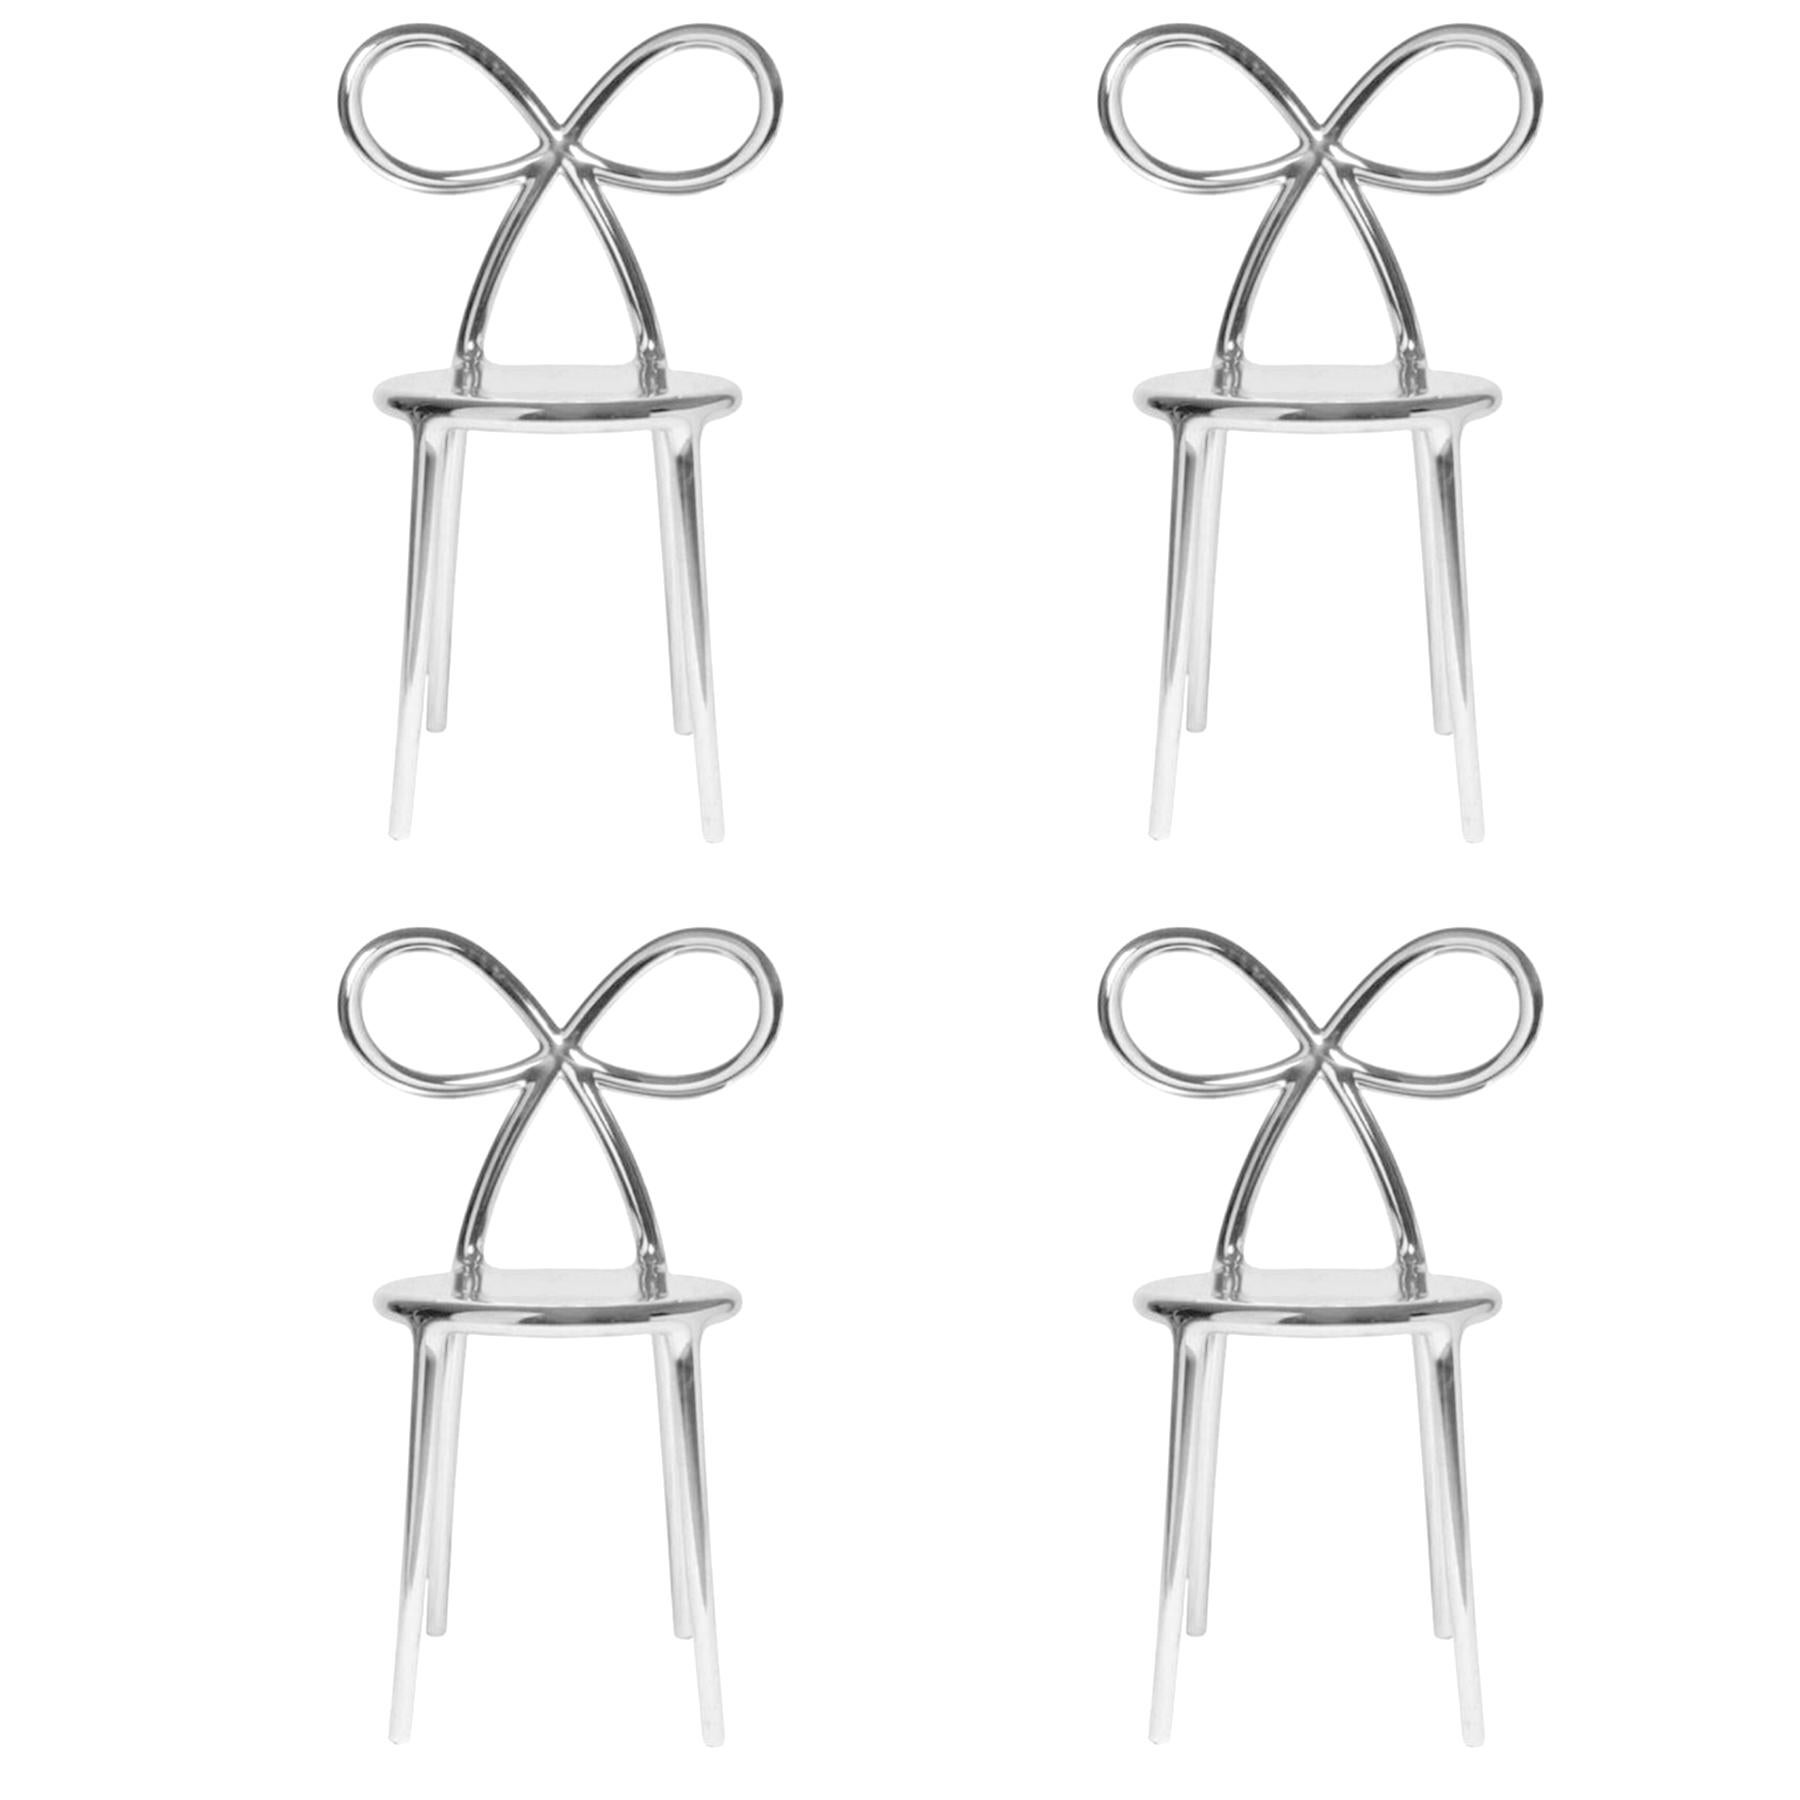 Contemporary Set of 4 Silver Metallic Ribbon Chairs by Nika Zupanc, Made in Italy For Sale